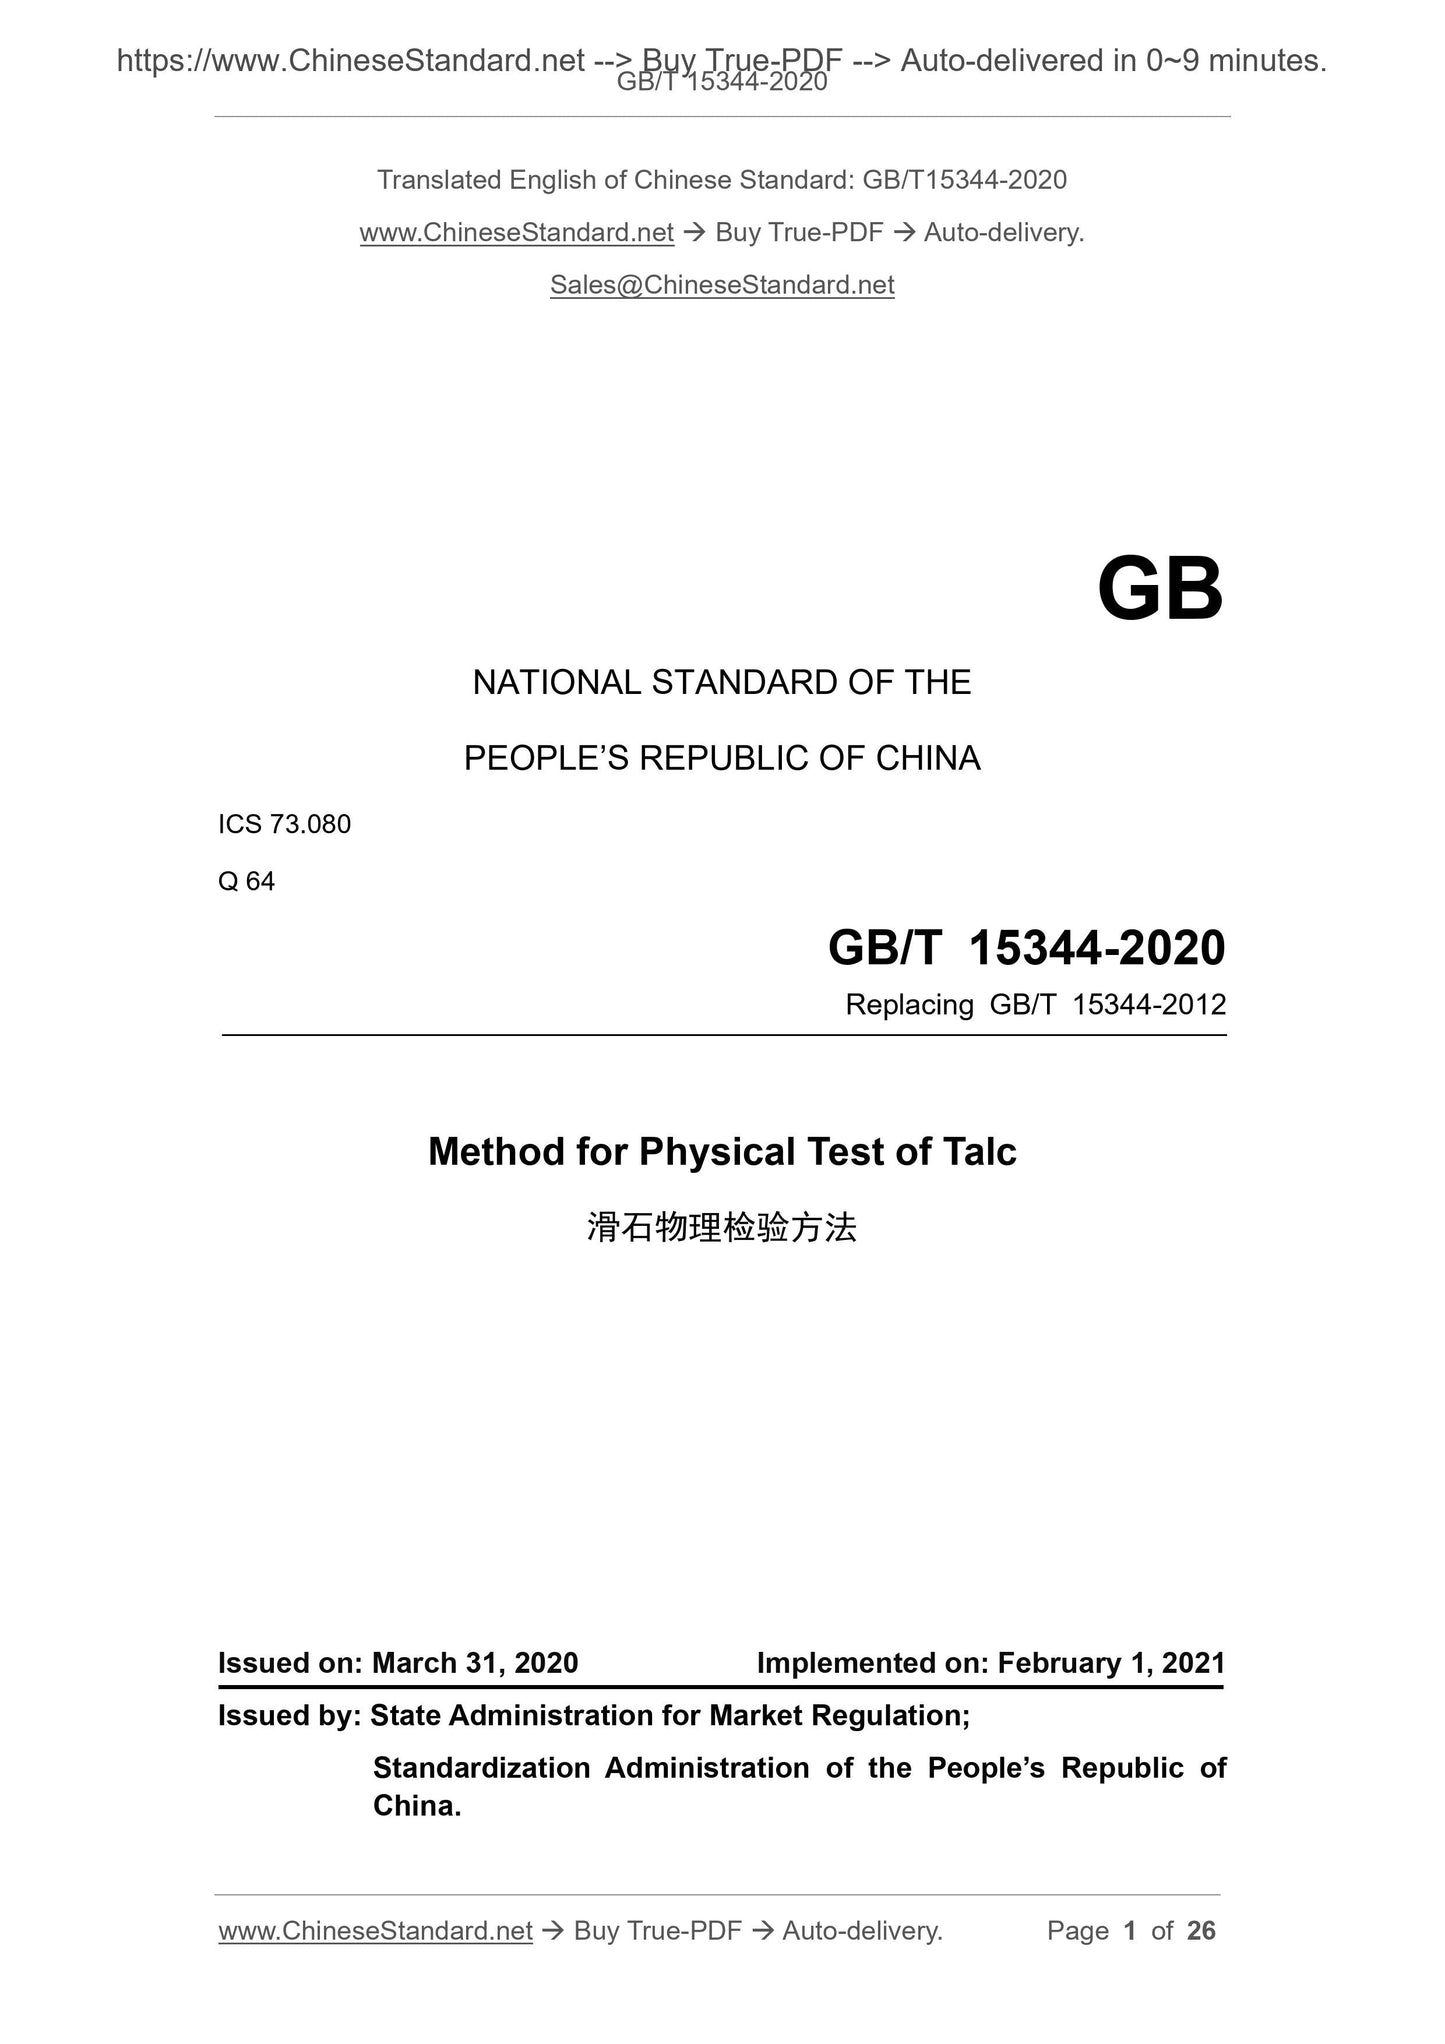 GB/T 15344-2020 Page 1